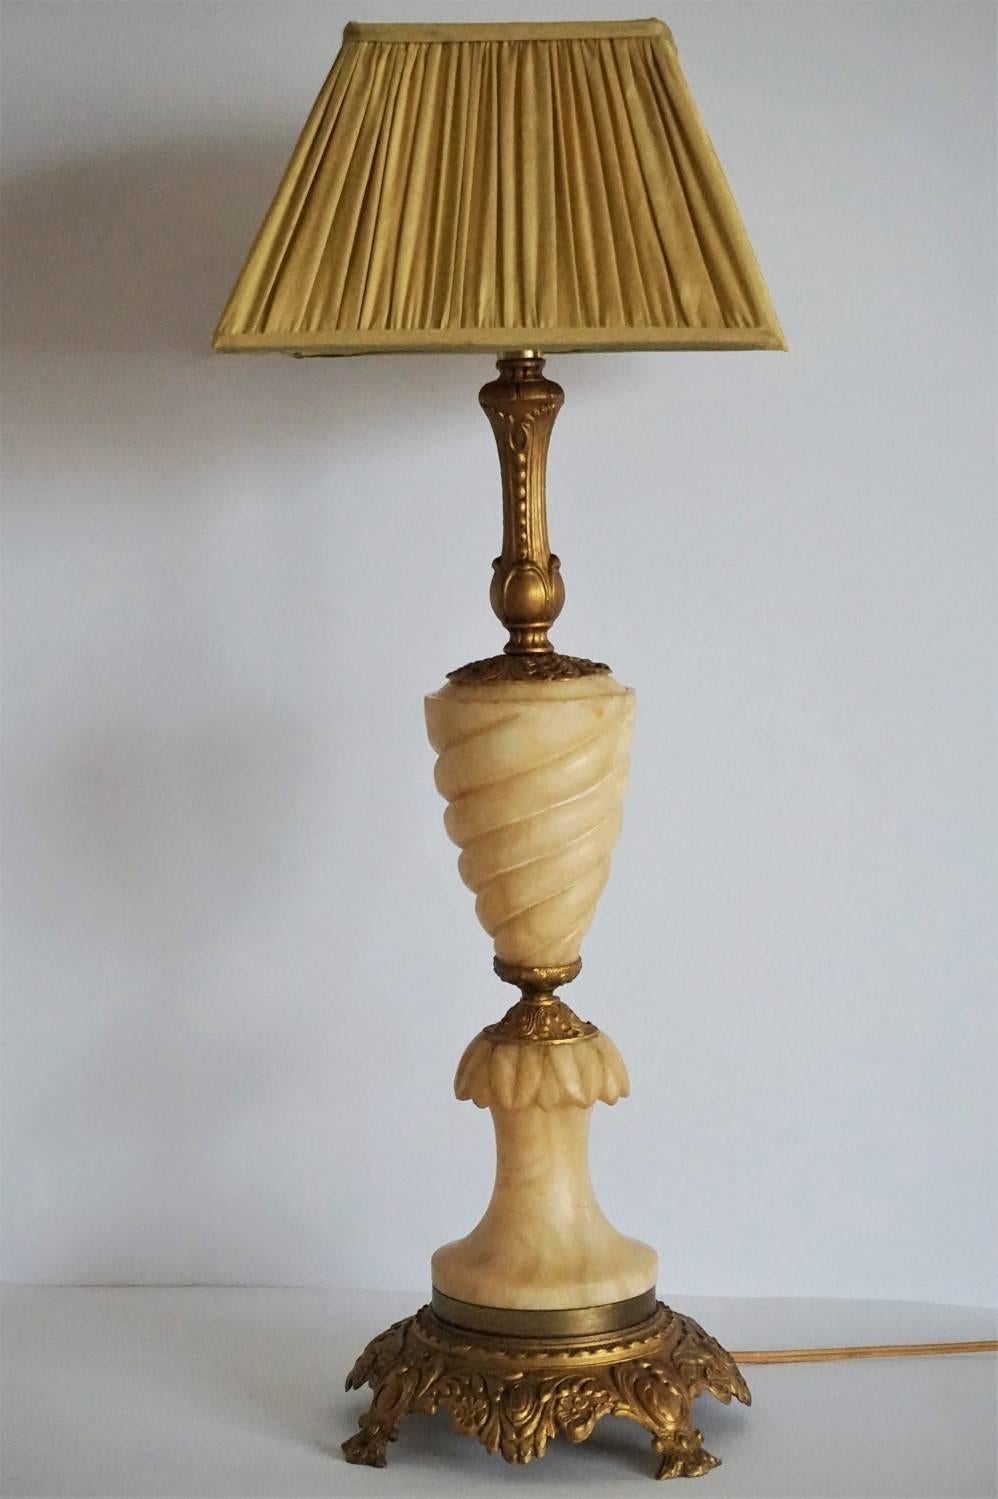 A tall Art Deco carved alabaster and gilt bronze table lamp, large richly decorated base with silk shade, Italy, 1940s.
One large E27 bulb socket
Measures:
Total height 26.75 inches (68cm)
Height without shade 22.75 inches (58cm)
Width 10